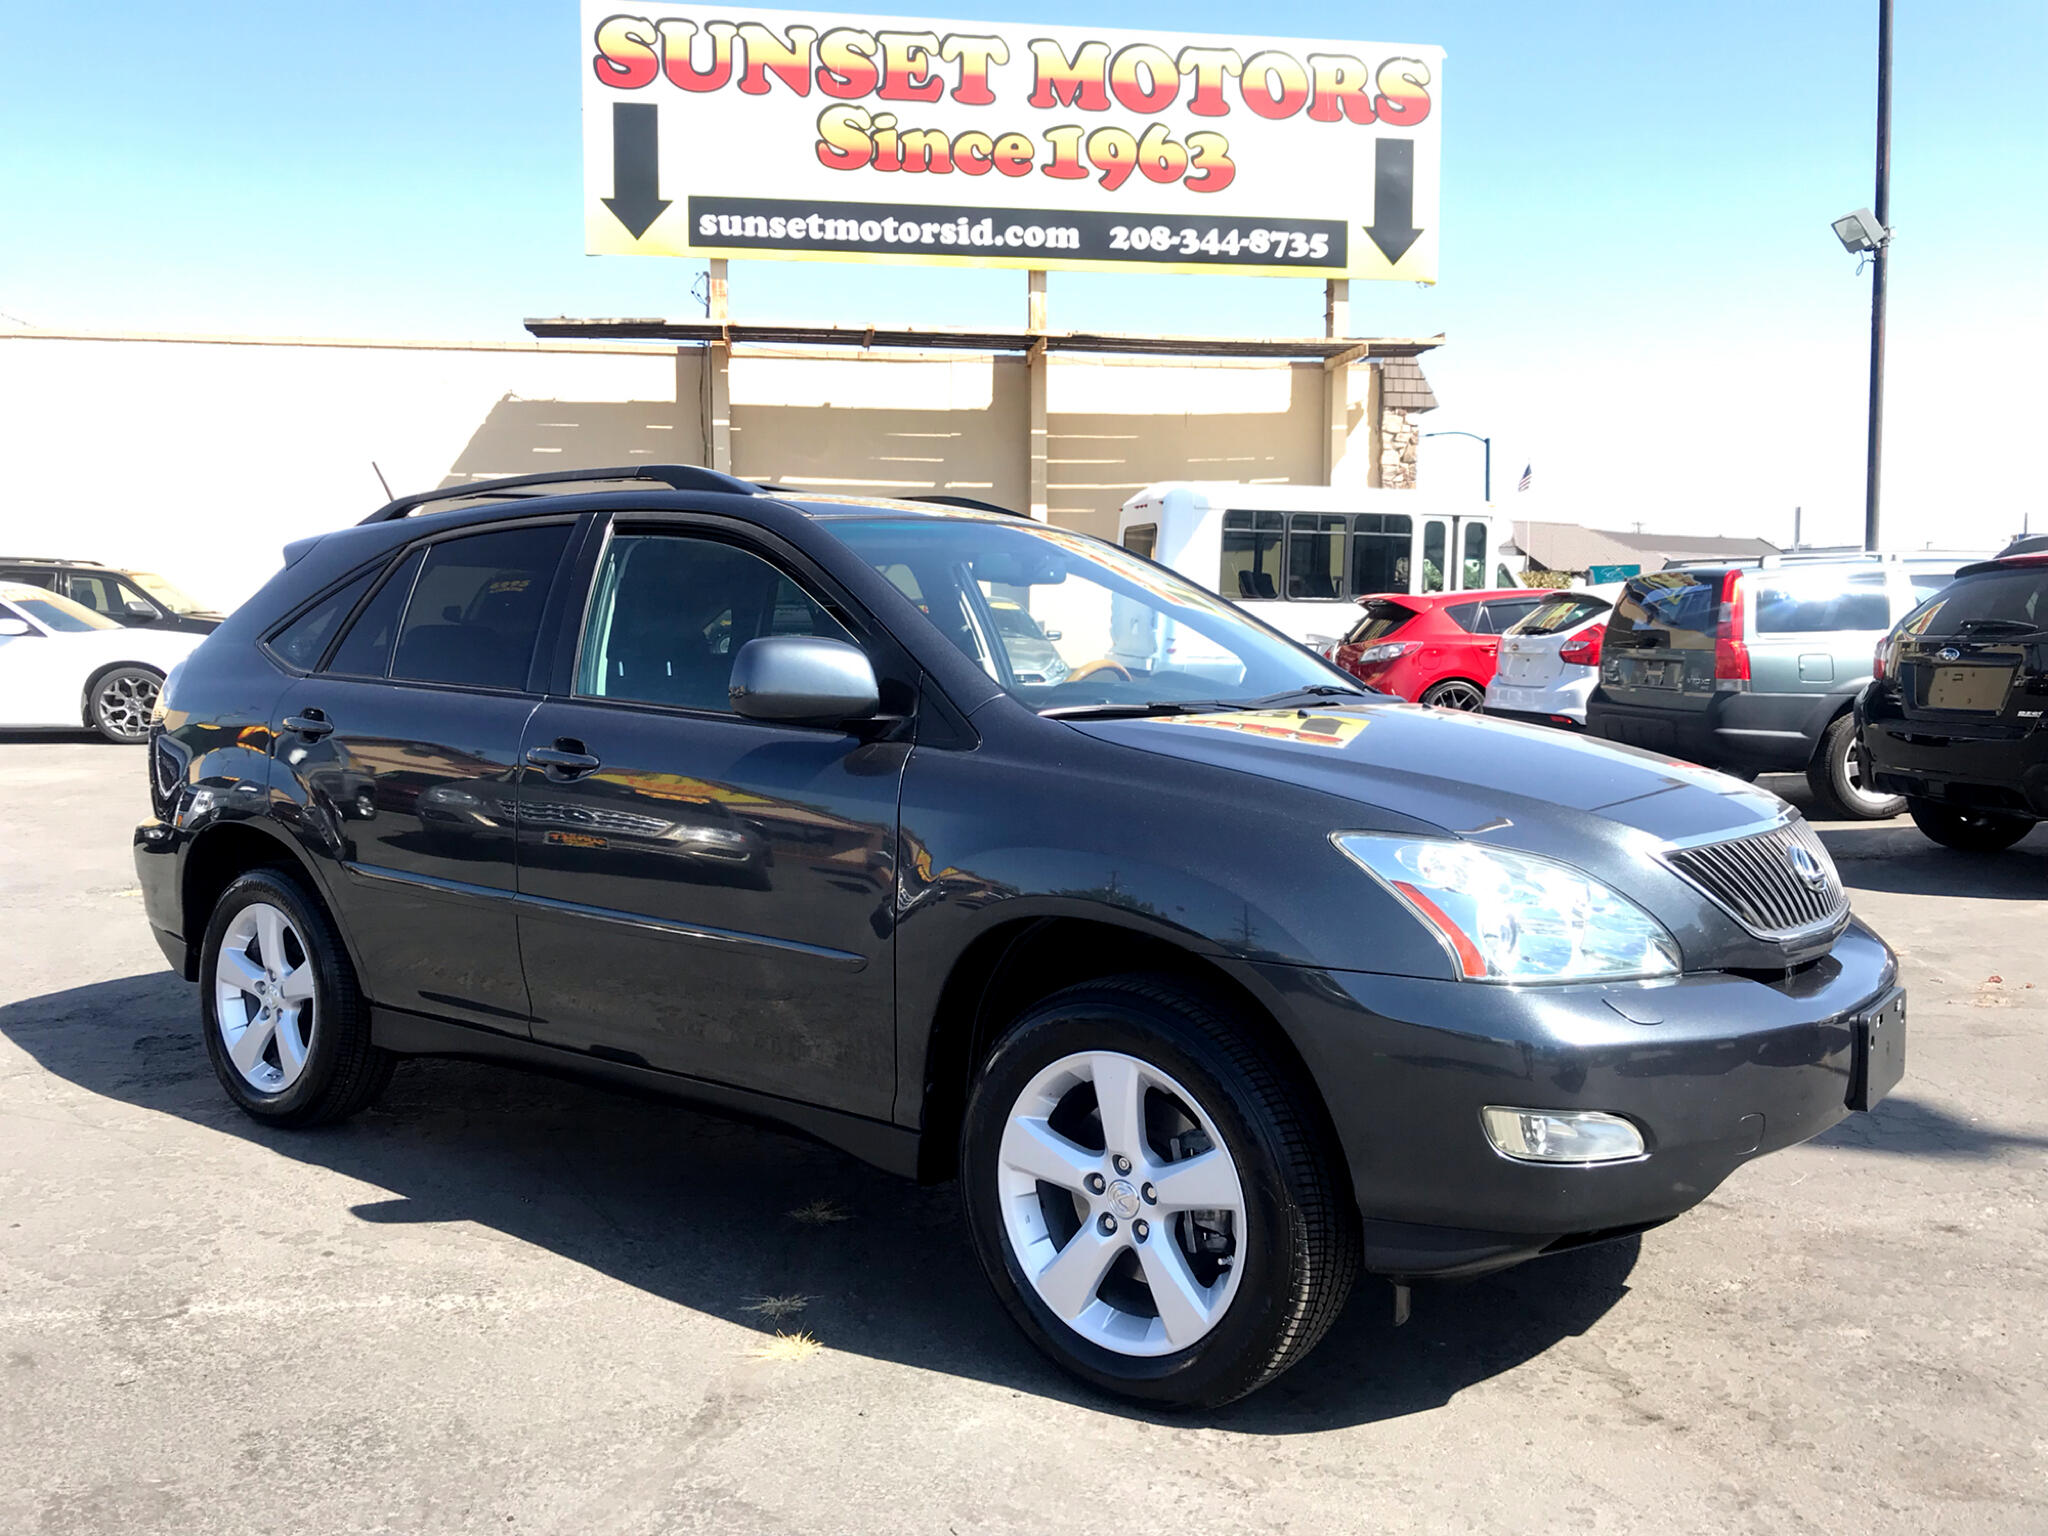 Used 2007 Lexus RX 350 FWD 4dr for Sale in Boise ID 83702